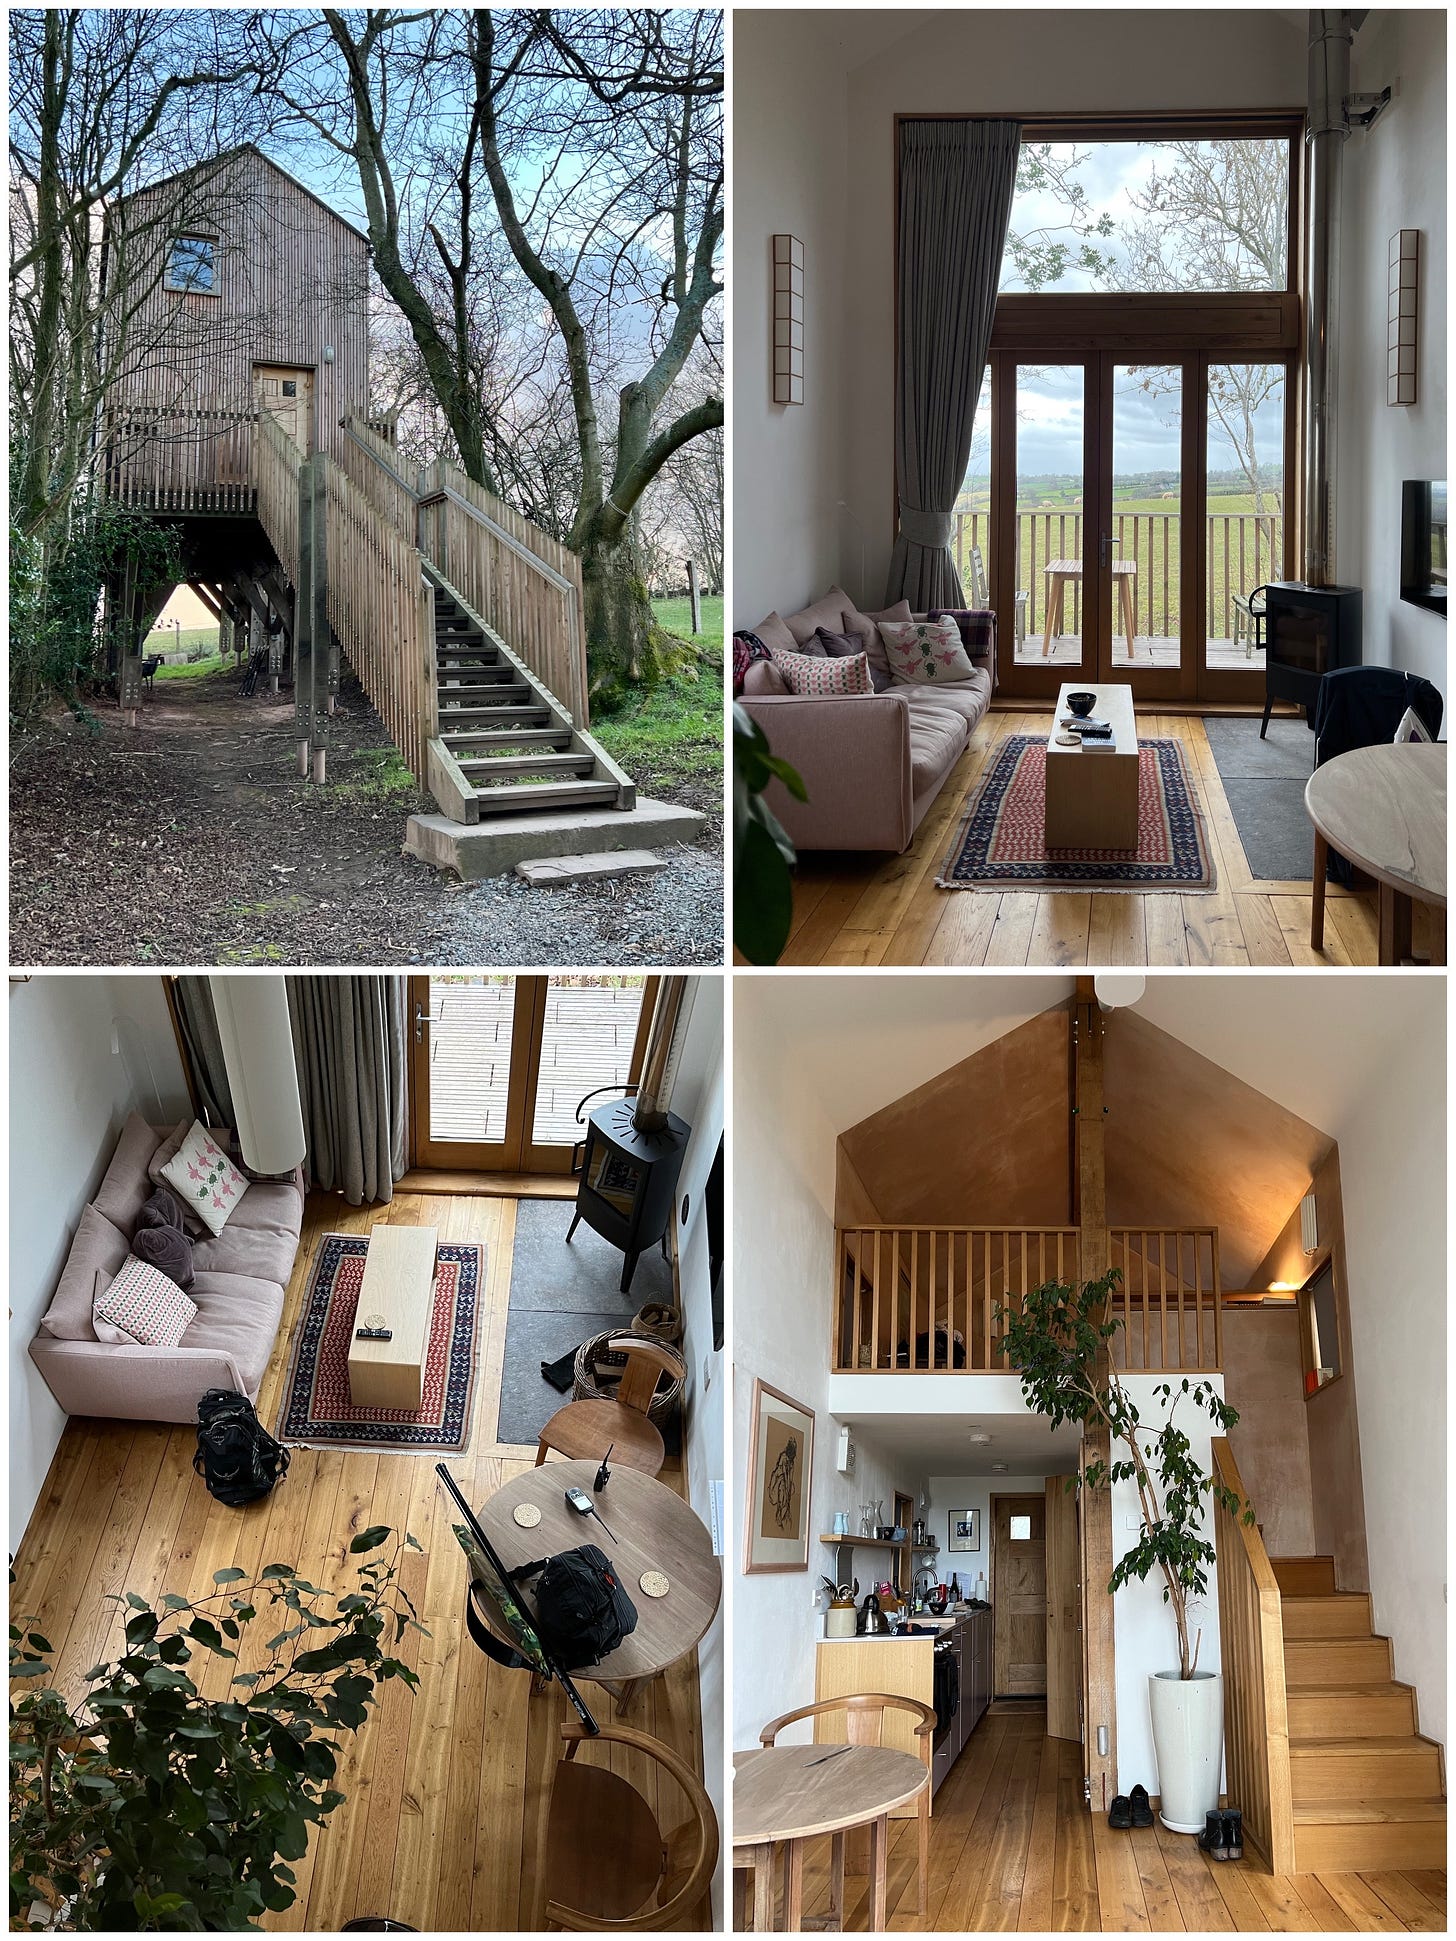 four photos in one showcasing a contemporary cabin on stilts in the trees. Some photos show the interior including oak woodwork and a woodturning stove. The bed room is on a mezzanine and the bathroom is tucked away next to the kitchen.